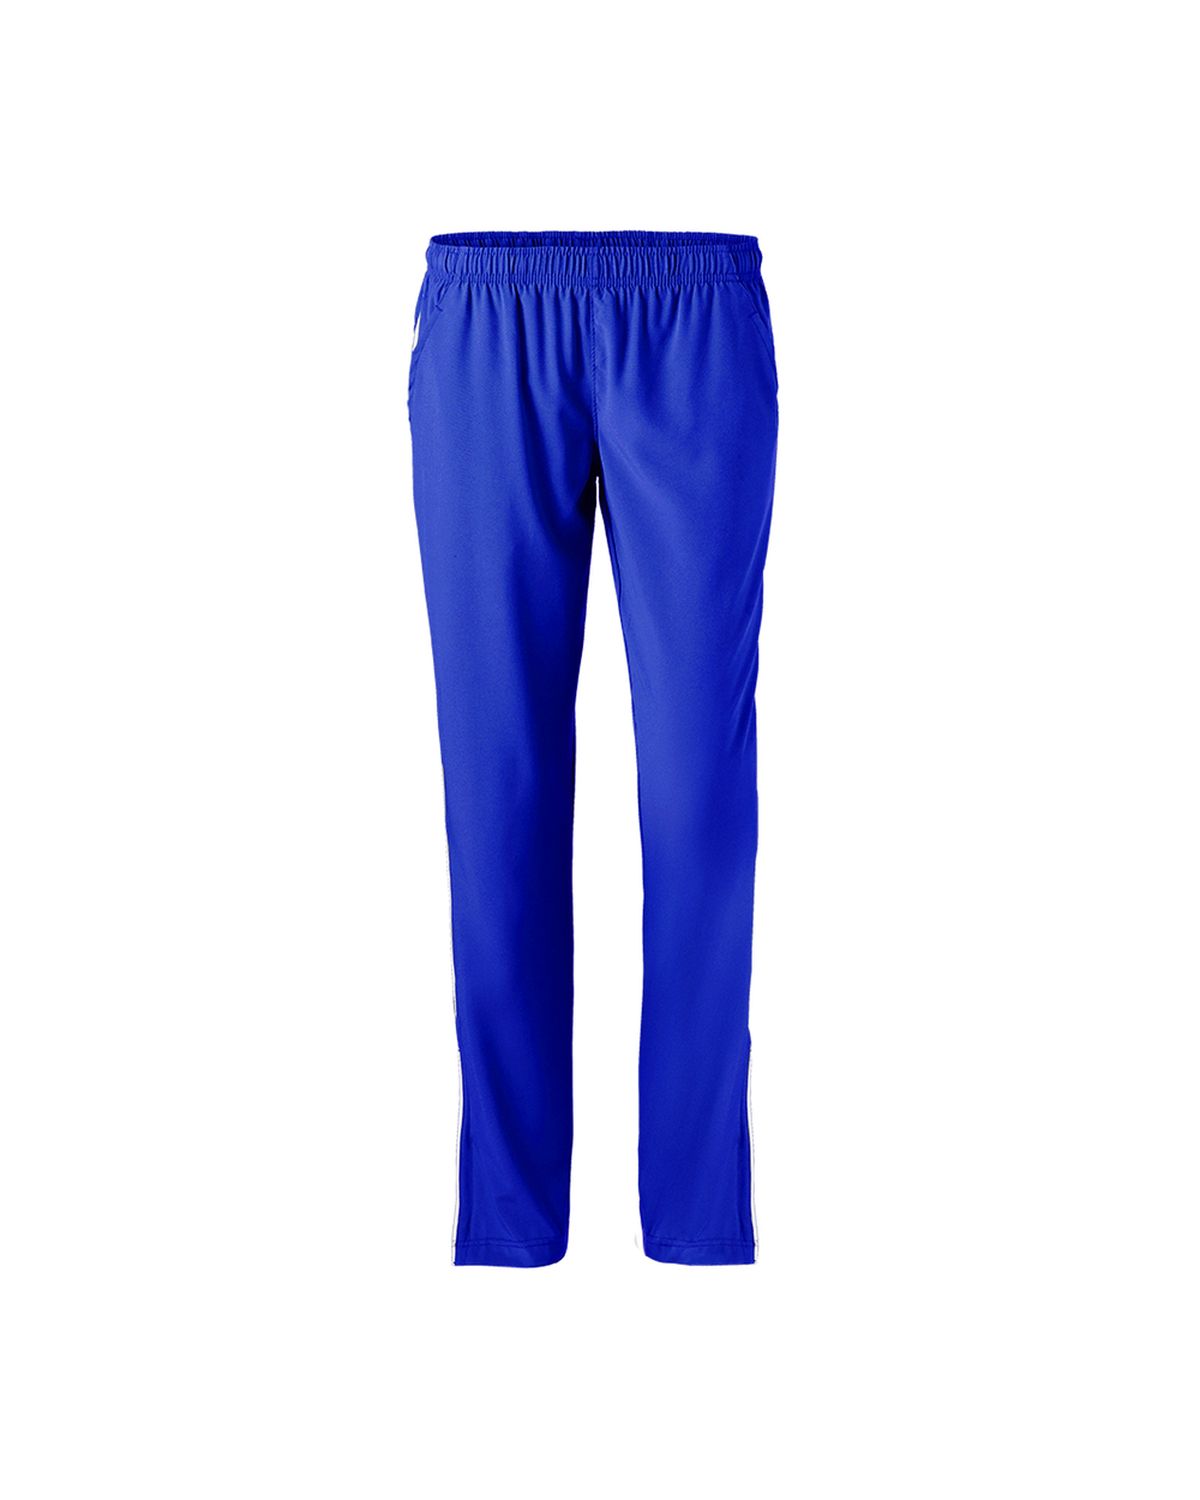 Soffe Youth Game Time Warm Up Pant